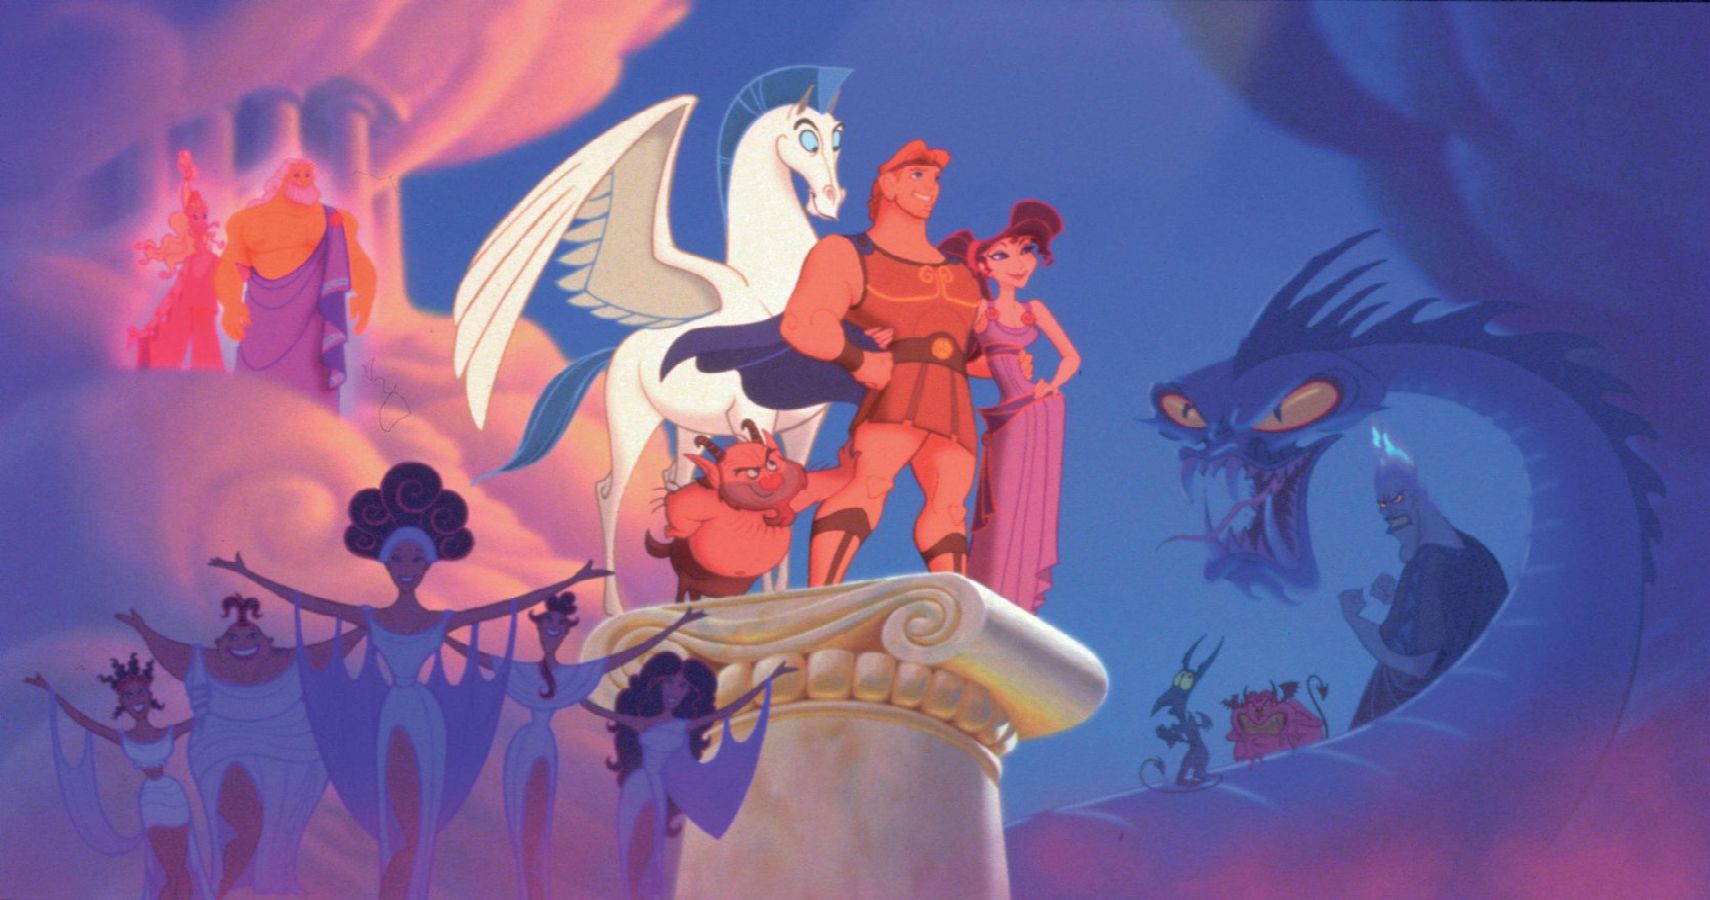 15 Actors Who Should Play Hercules in the Disney Live-Action Movie